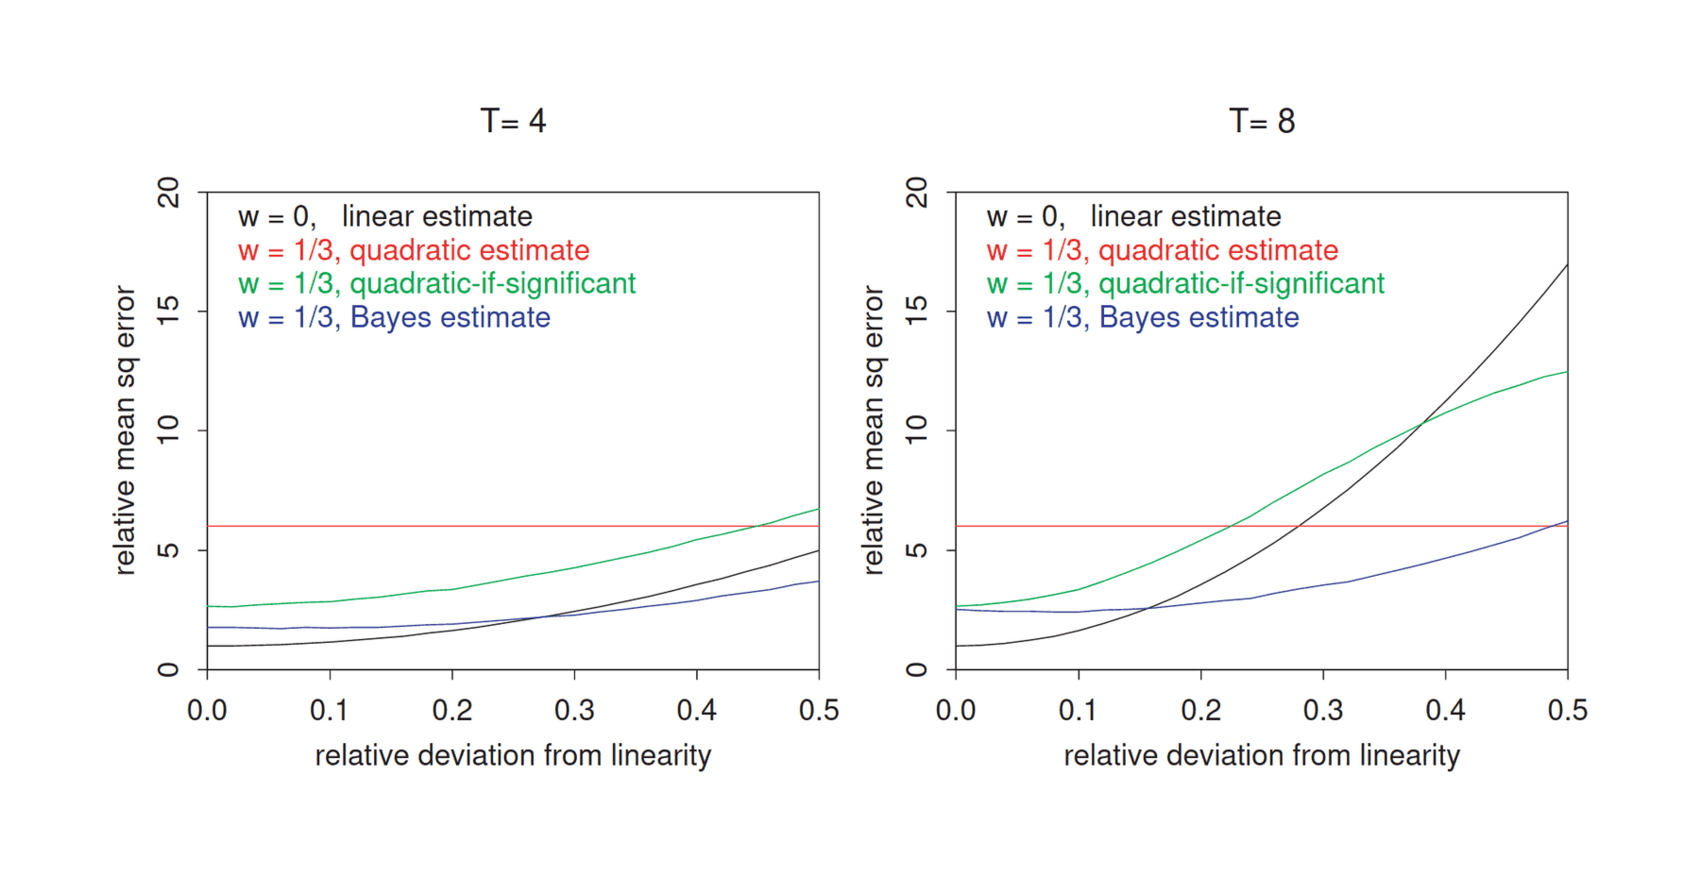 Figure 2: Mean squared error (as a multiple of σ2/​n) for 4 design/​estimator combinations of θ0.5 as a function of |δ|, the relative magnitude of nonlinearity of the dose-response. The plots show T = 4 and T = 8, which correspond to a treatment effect that is 2 or 4 standard deviations away from zero. The design w = 0 (all the data collected at the 2 extreme points) dominates unless both |δ| and T are large. When the design w = 1⁄3 (data evenly divided between the 3 design points) is chosen, the Bayes estimate has the lowest mean squared error for the range of δ and T considered here.